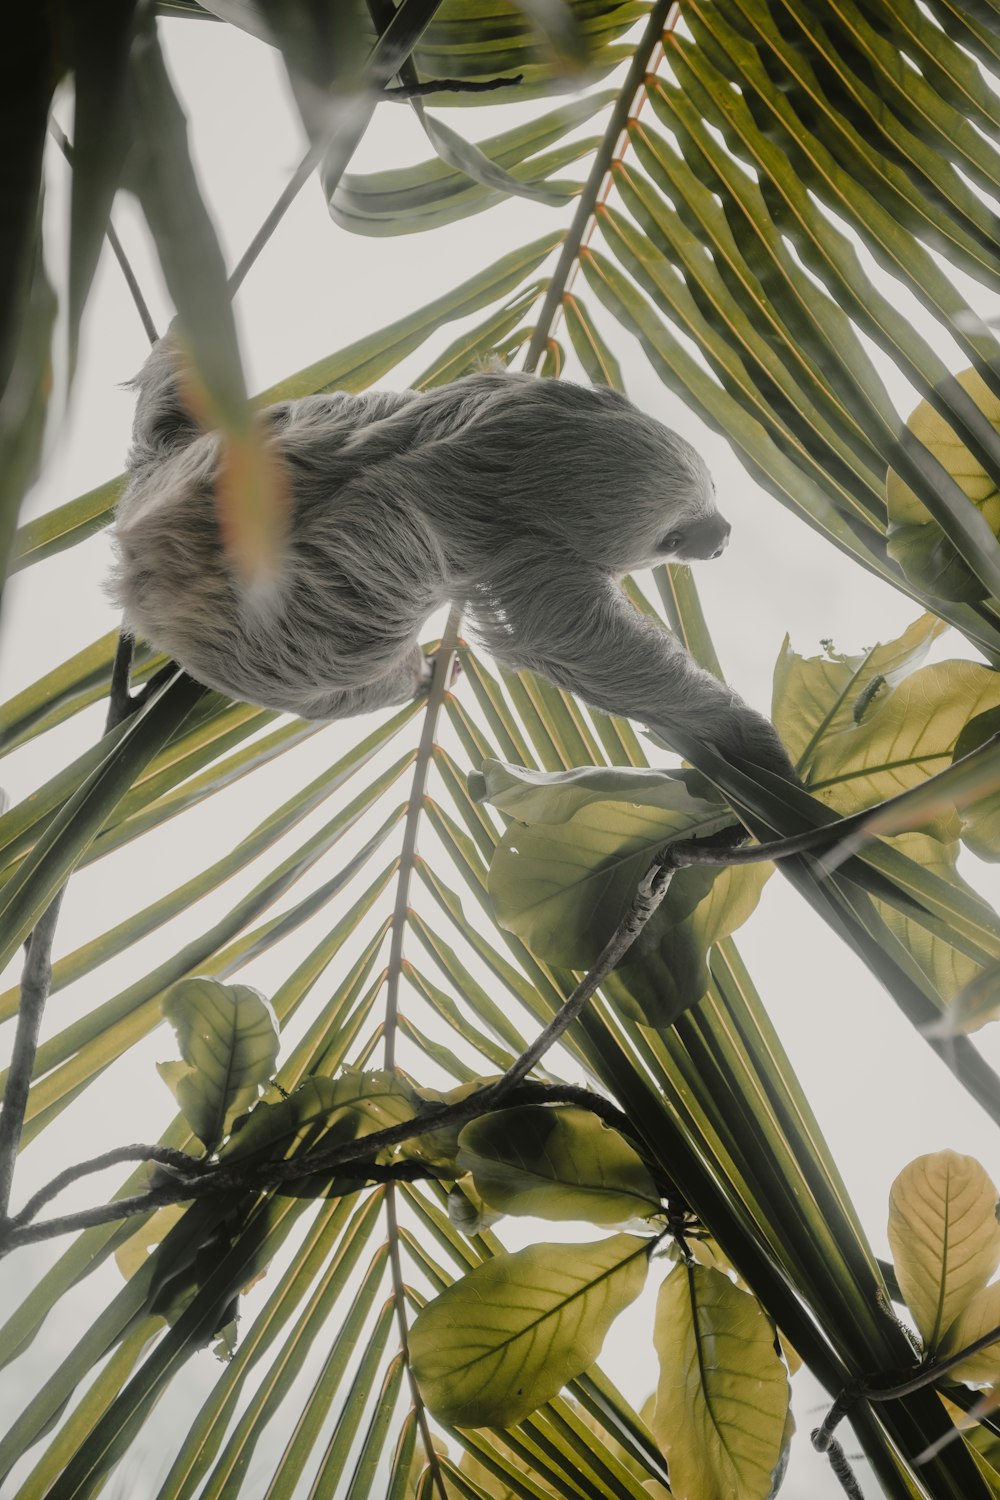 a sloth hanging from a tree branch in the jungle